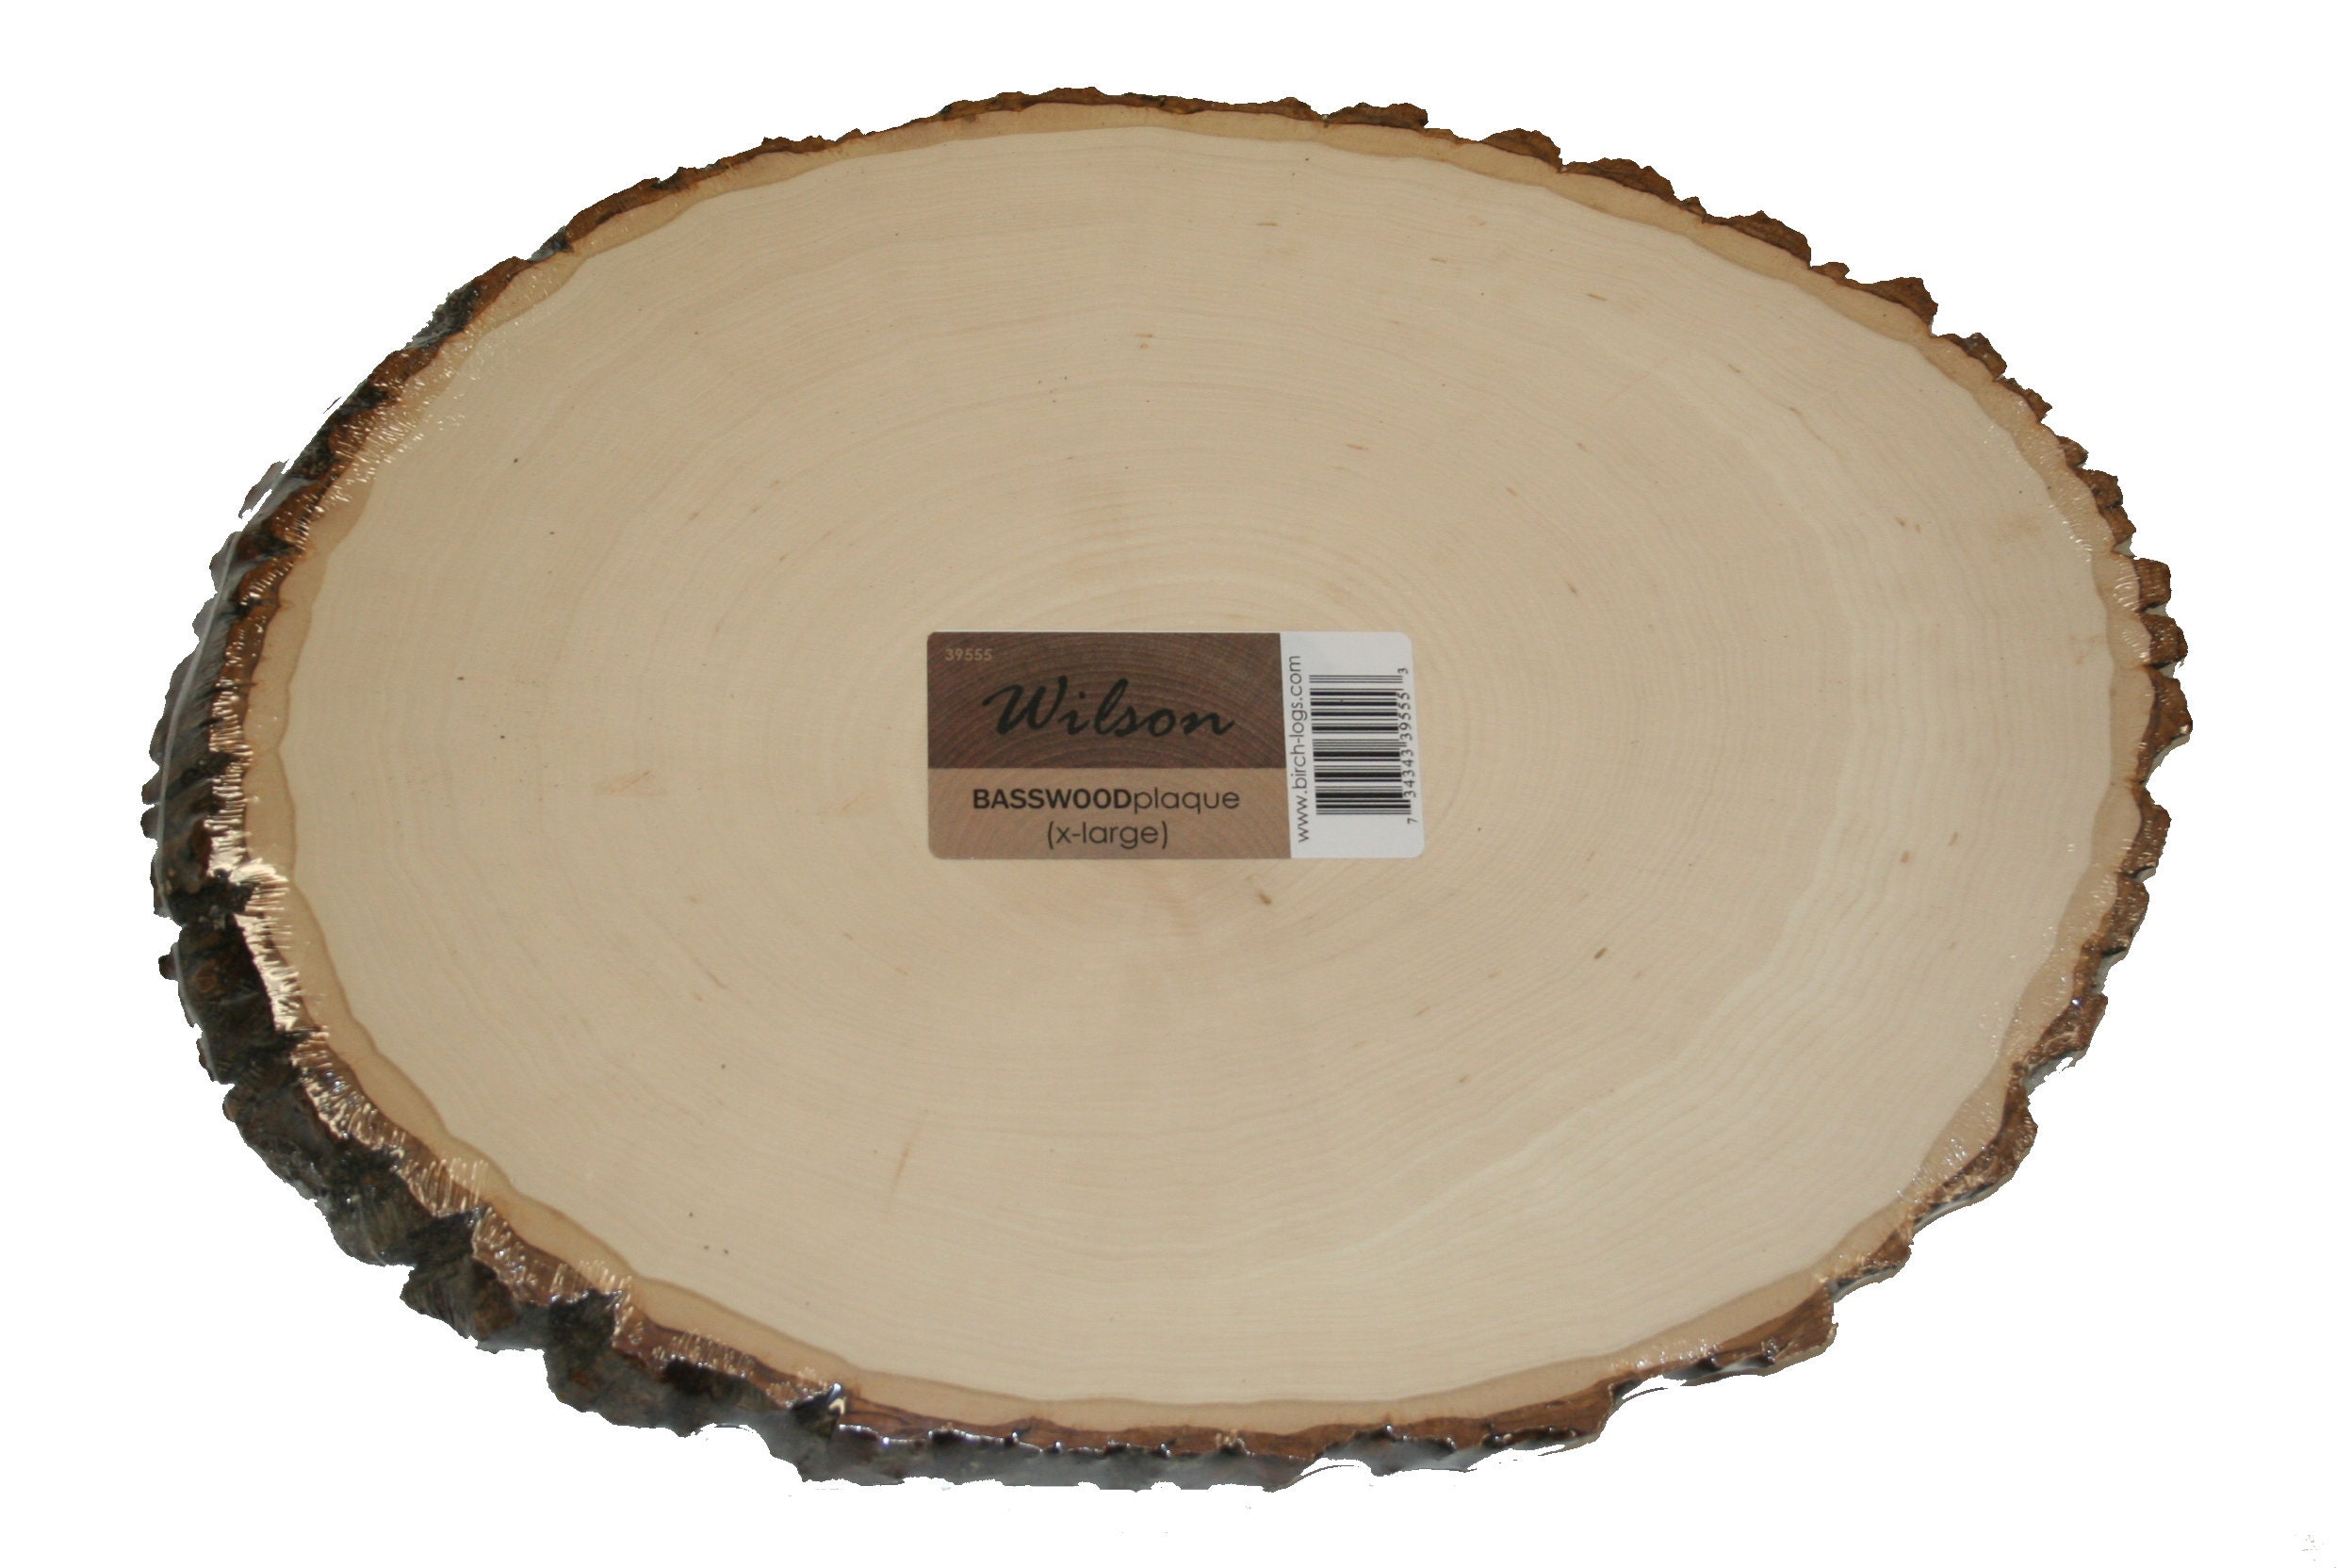 Large Wilson Basswood Round Thick 9-11 wide x 1 5/8 thick 